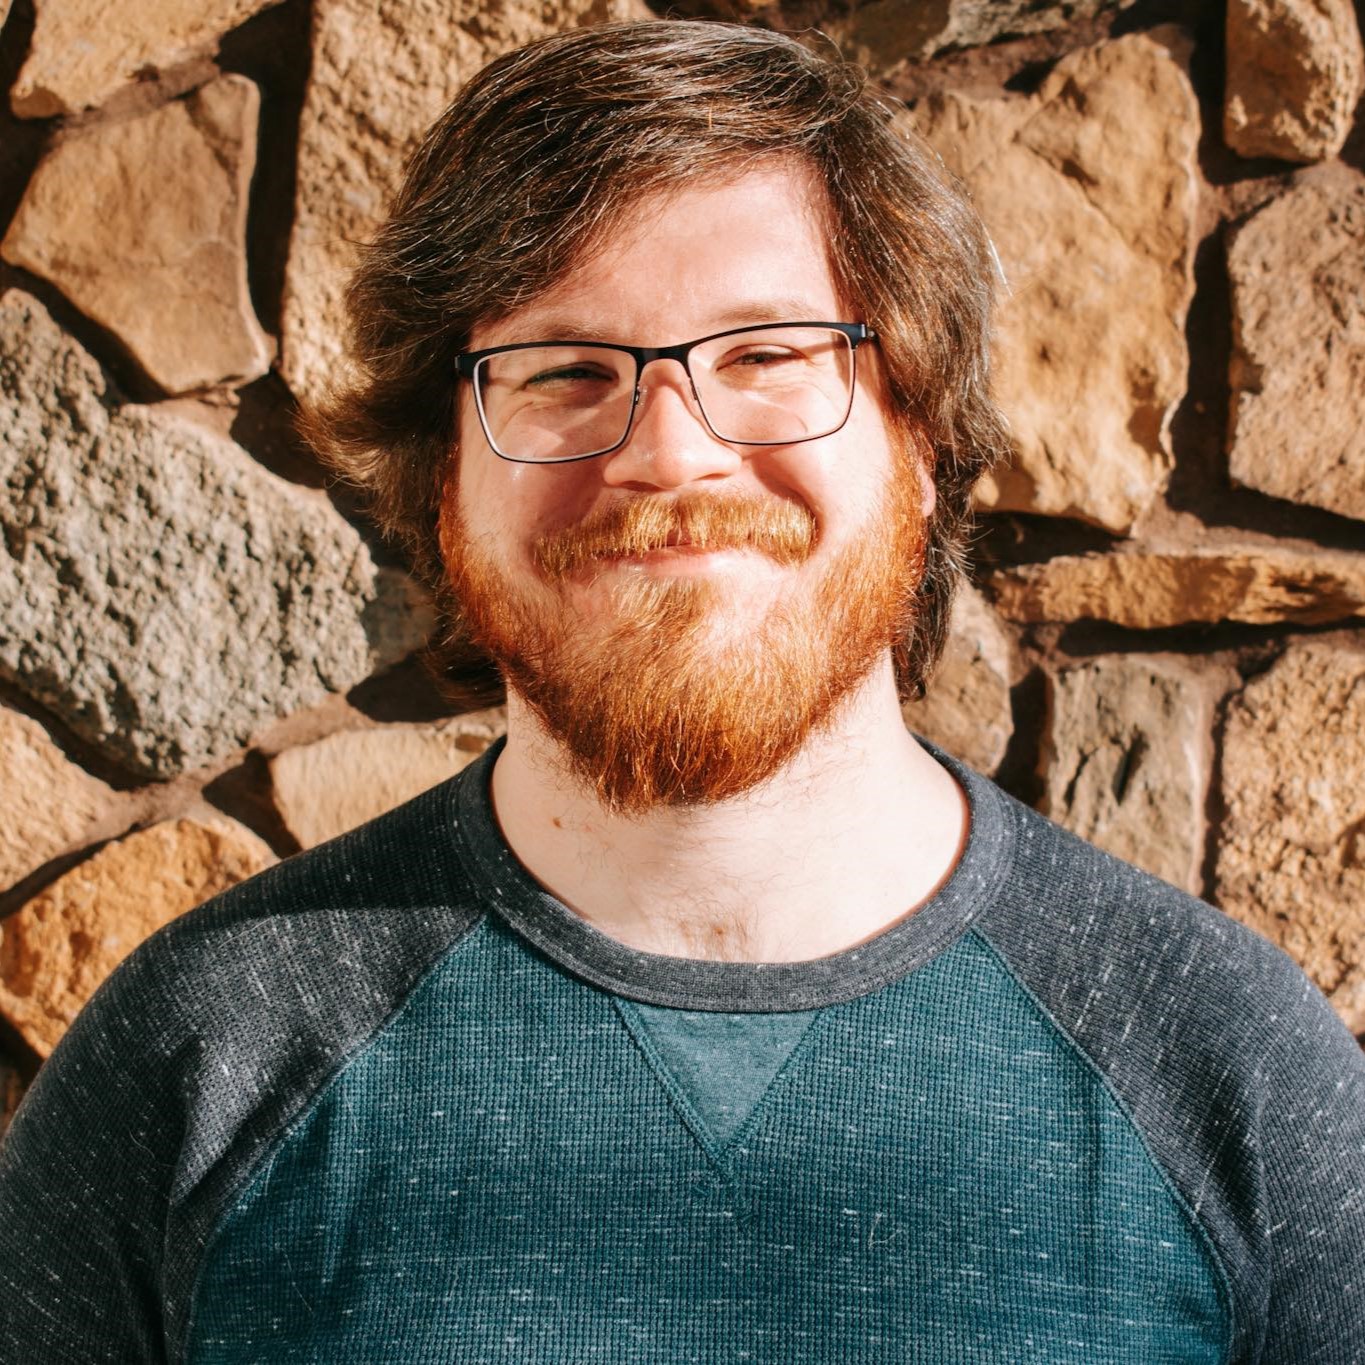 Headshot of a white man with shorter brown hair, glasses, and a red beard wearing a blue sweater in front of a stone background